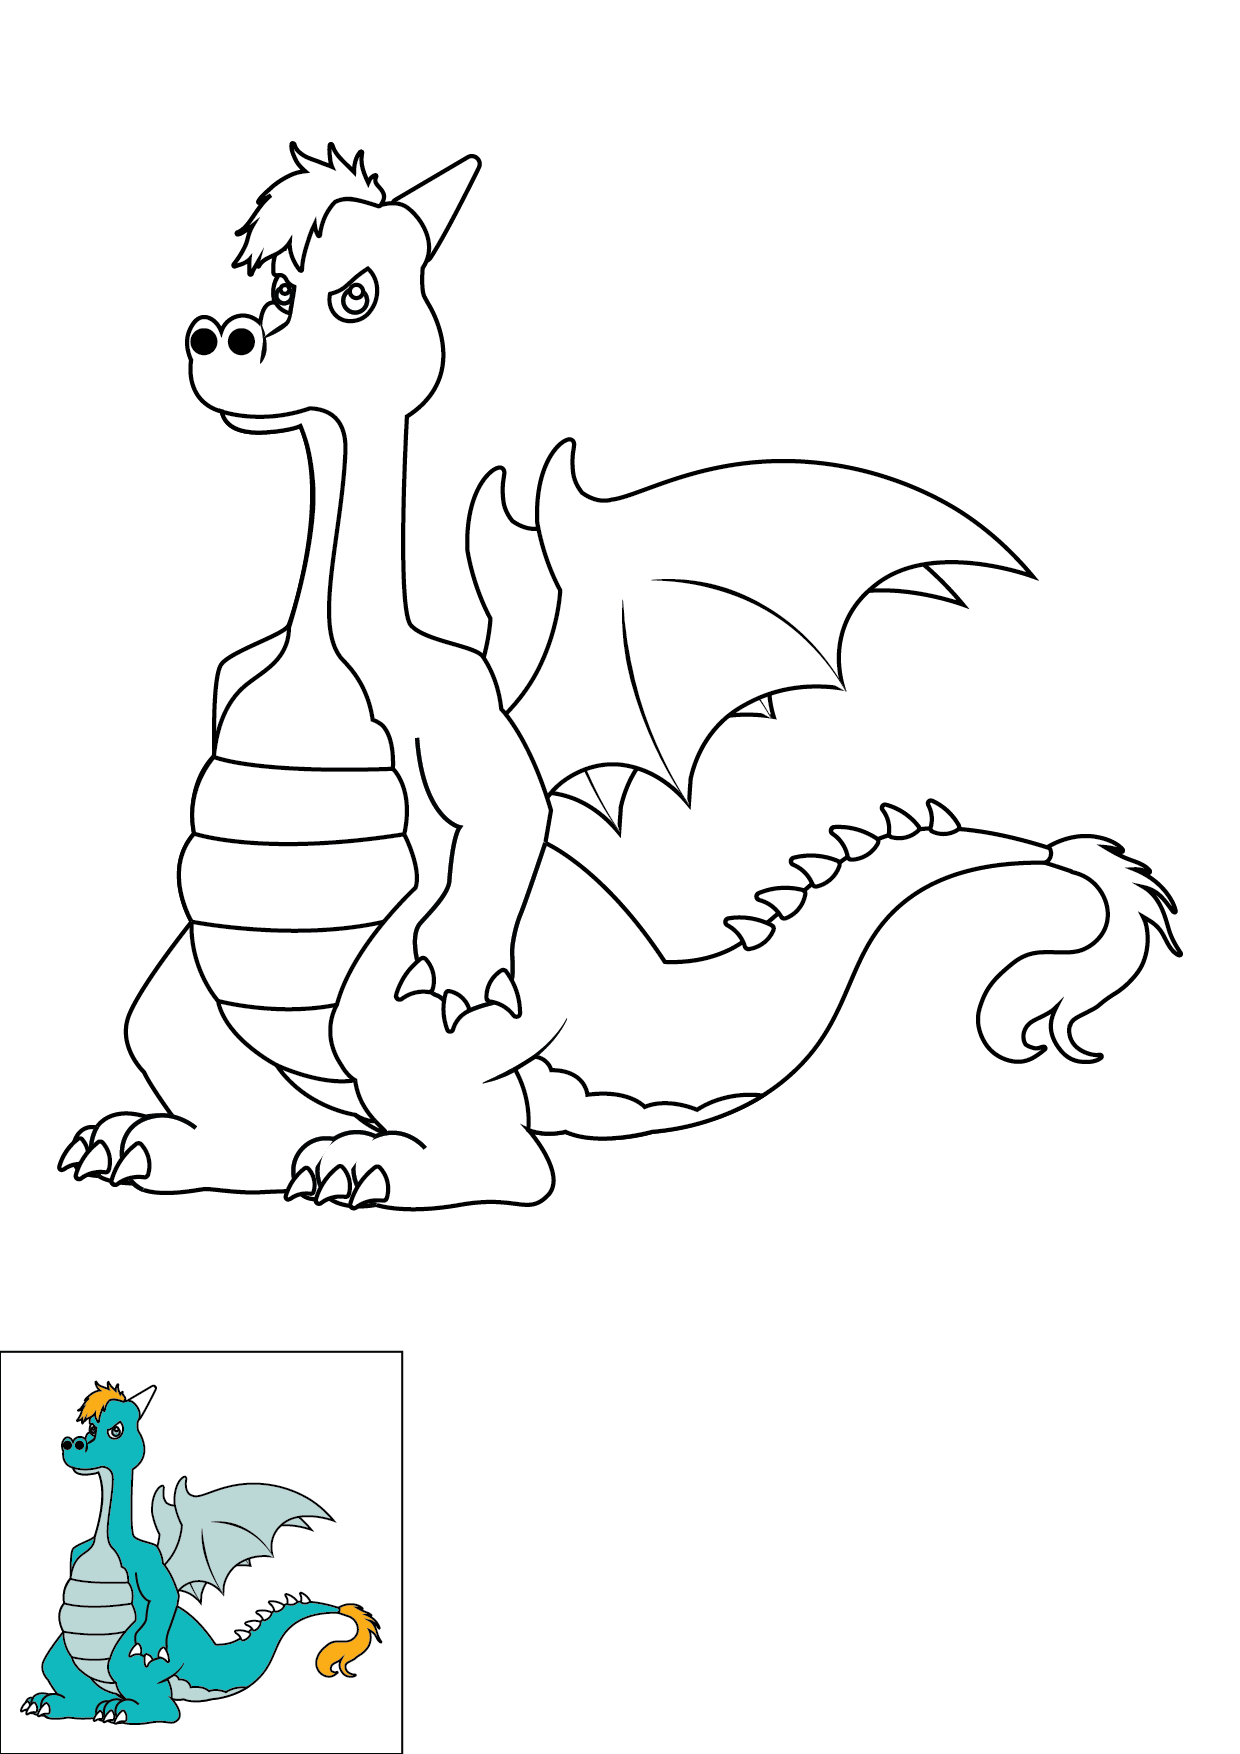 How to Draw A Dragon Step by Step Printable Color